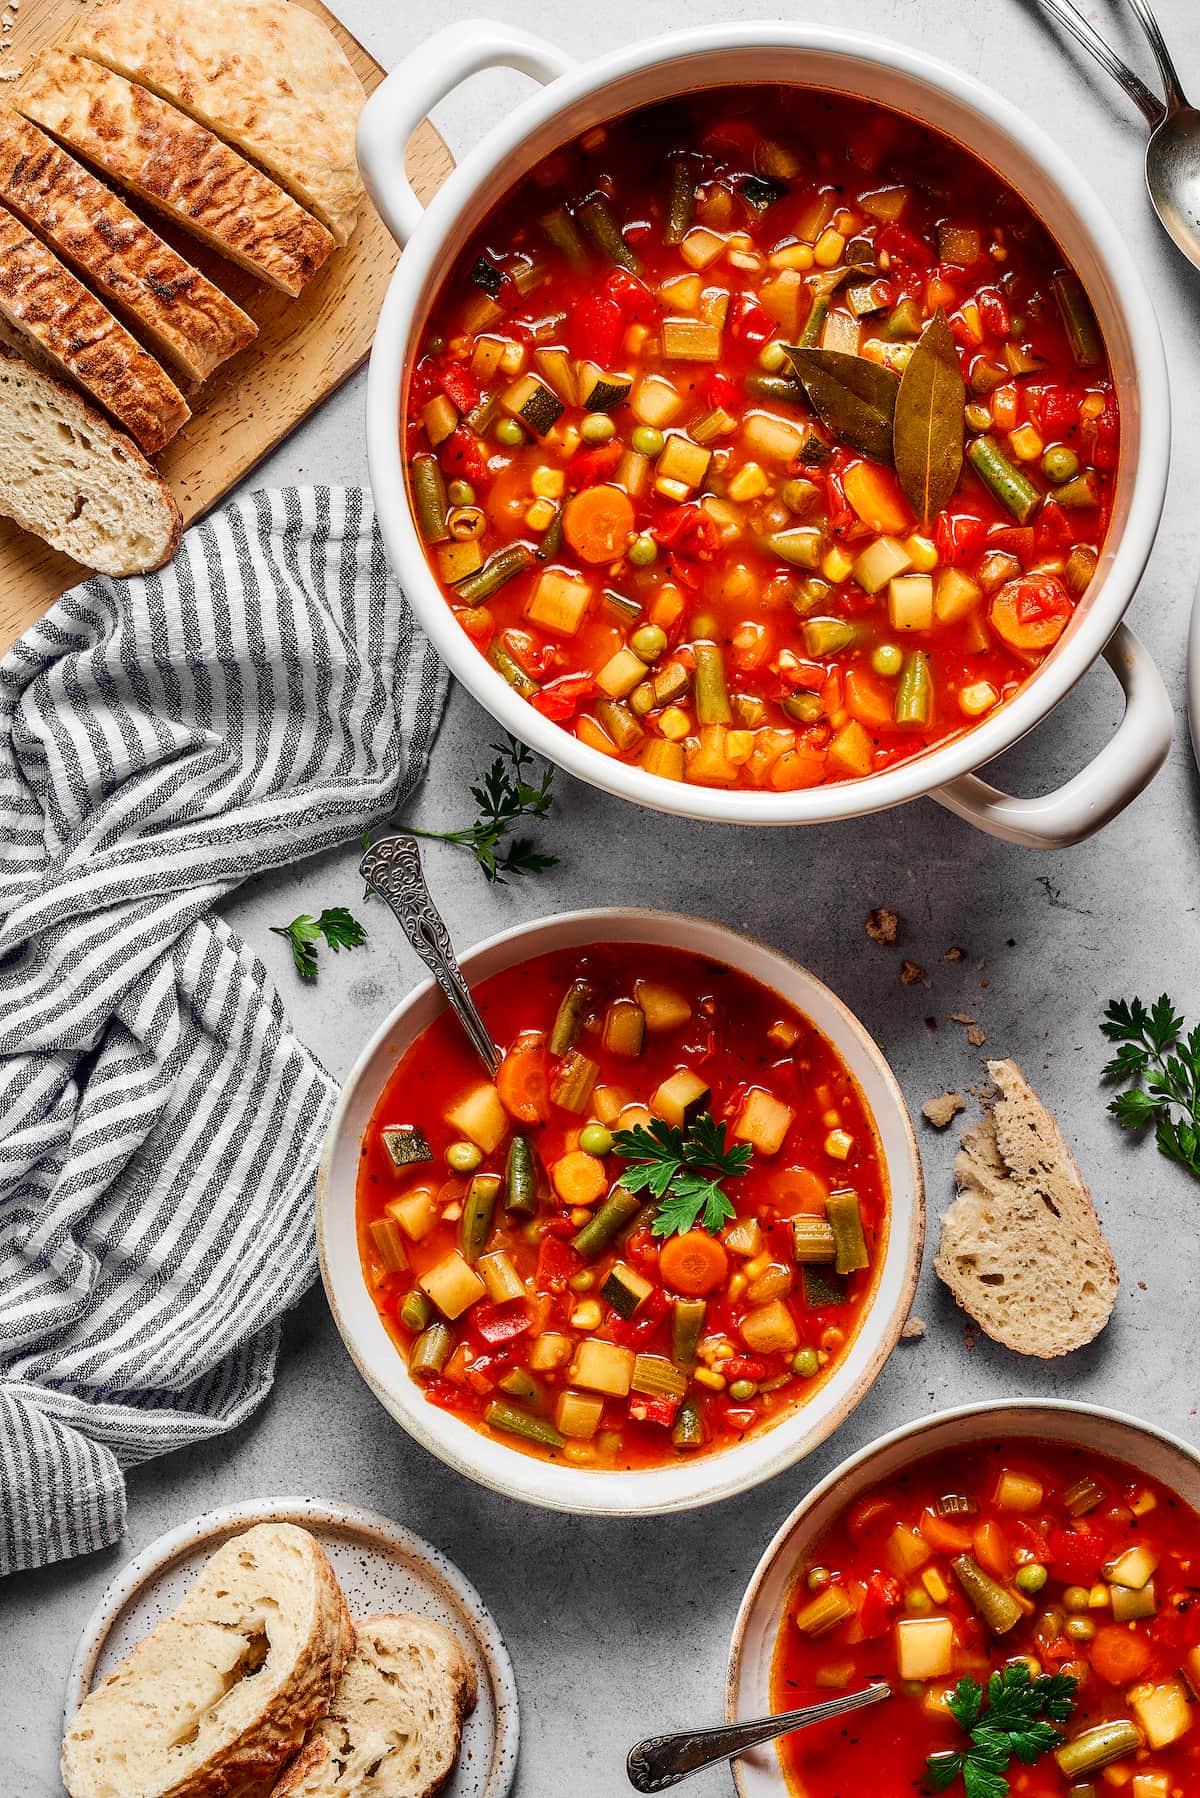 A full spread of homemade vegetable soup in two bowls, next to a large pot and a loaf of crusty bread.